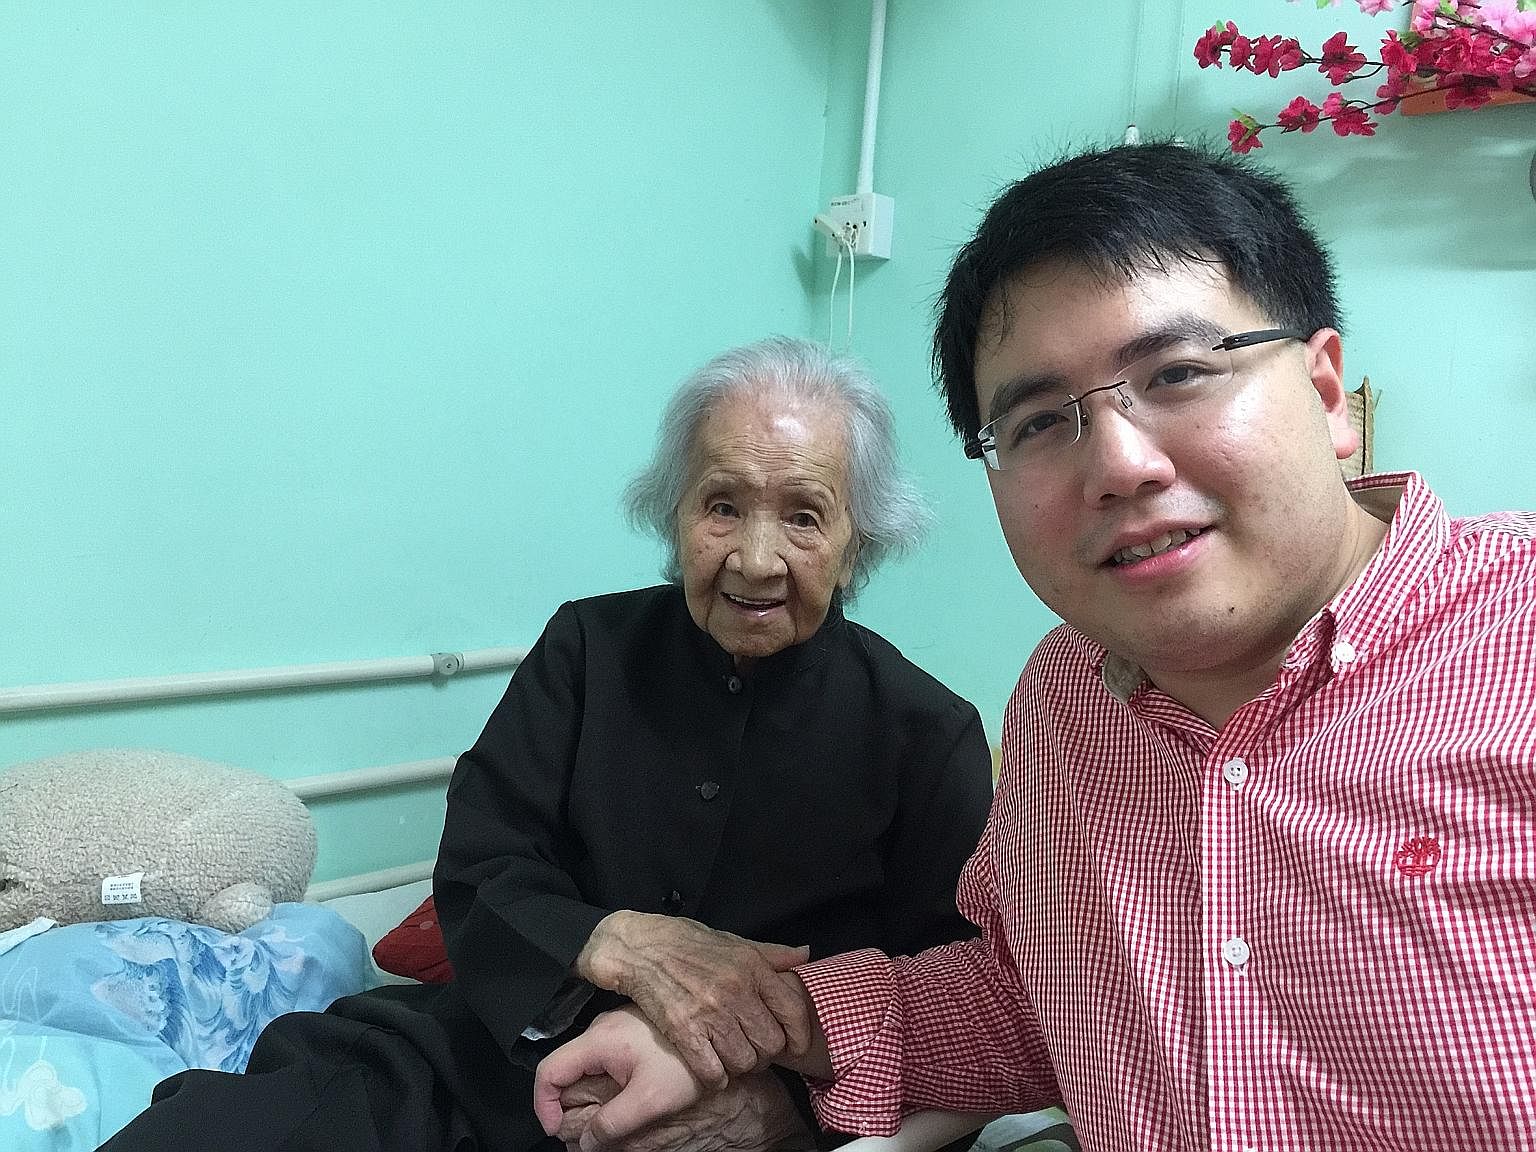 The writer's nephew, Yi Da, with his 107-year-old great aunt, Madam Goh Seok Lian. Despite being only 27 years old, he has already established and used a CPF Investment Scheme account. As our lifespans get longer, we will have to save much earlier in